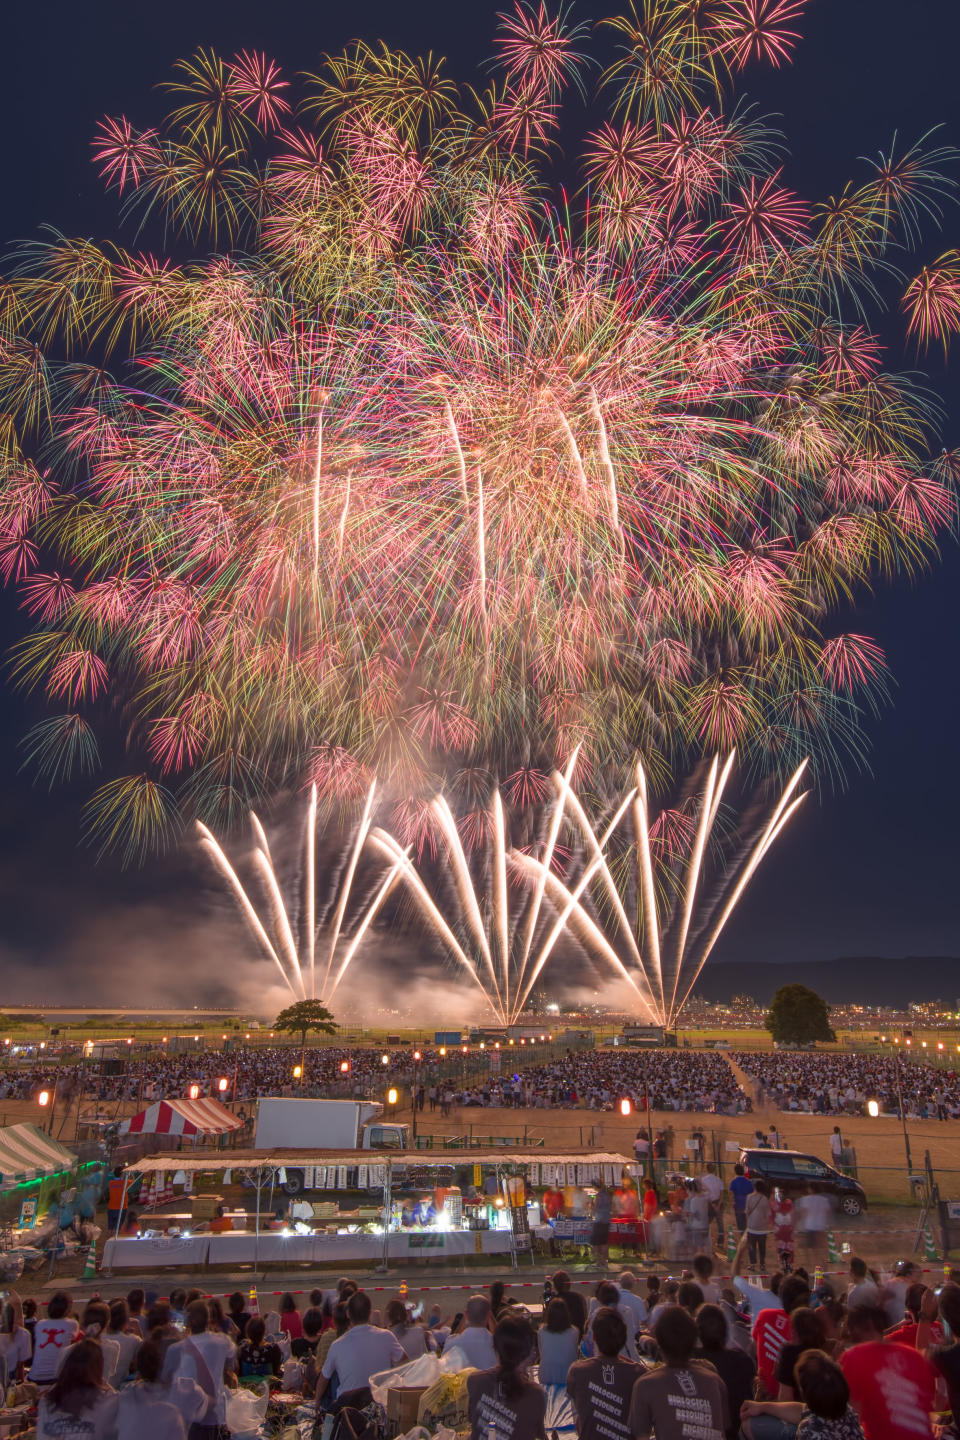 Photographer travels across Japan snapping incredible firework displays